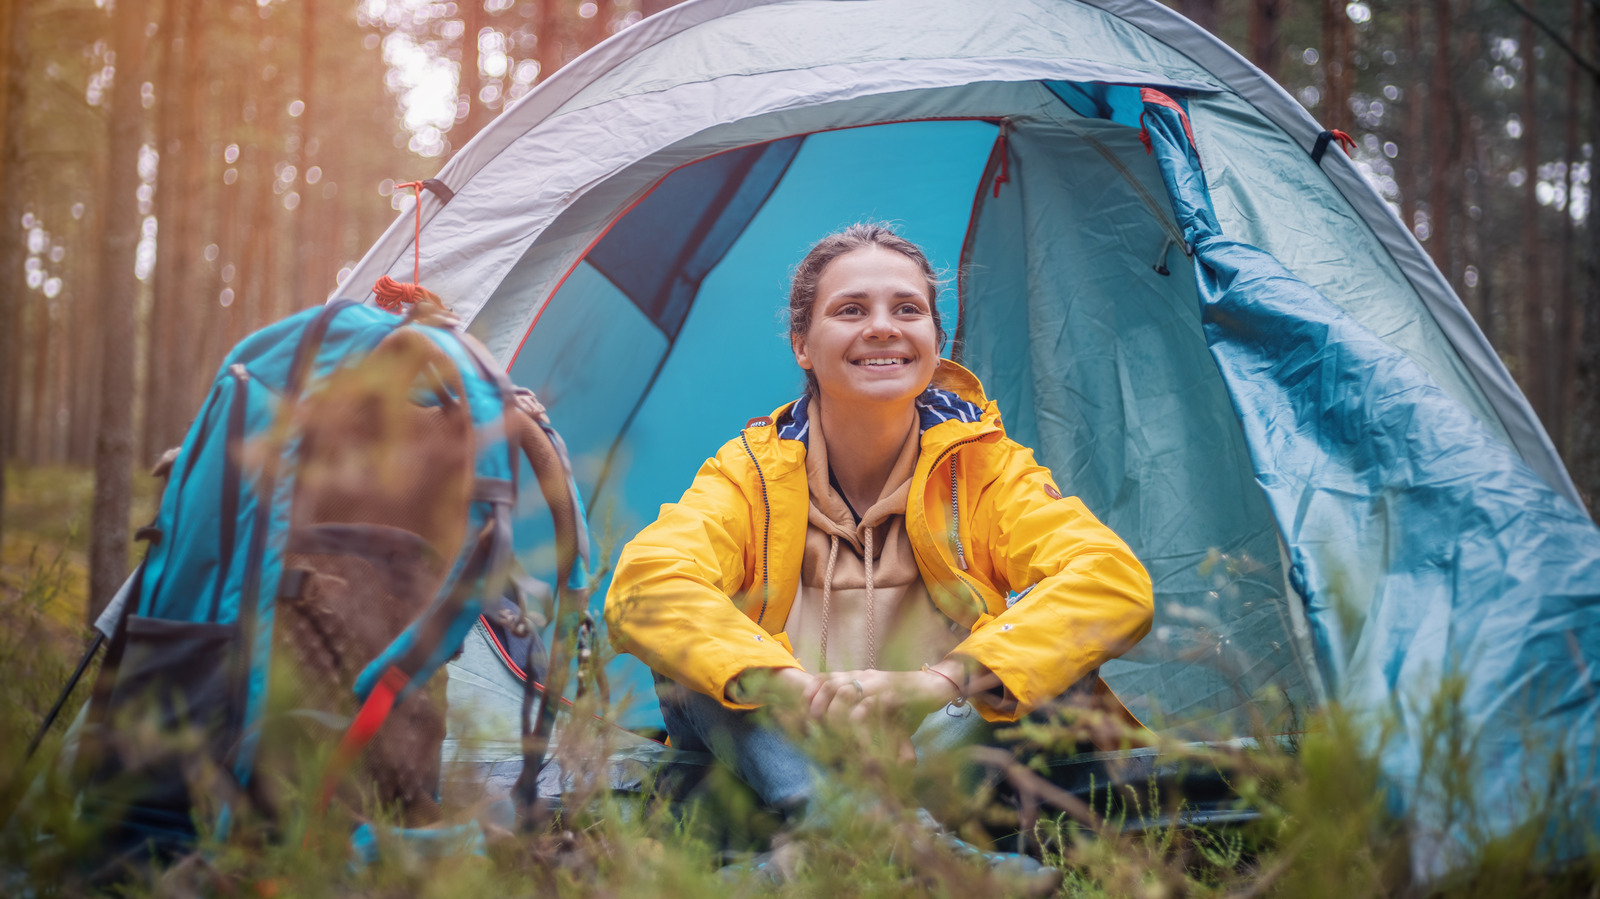 Here's How To Be Safer While Camping Alone